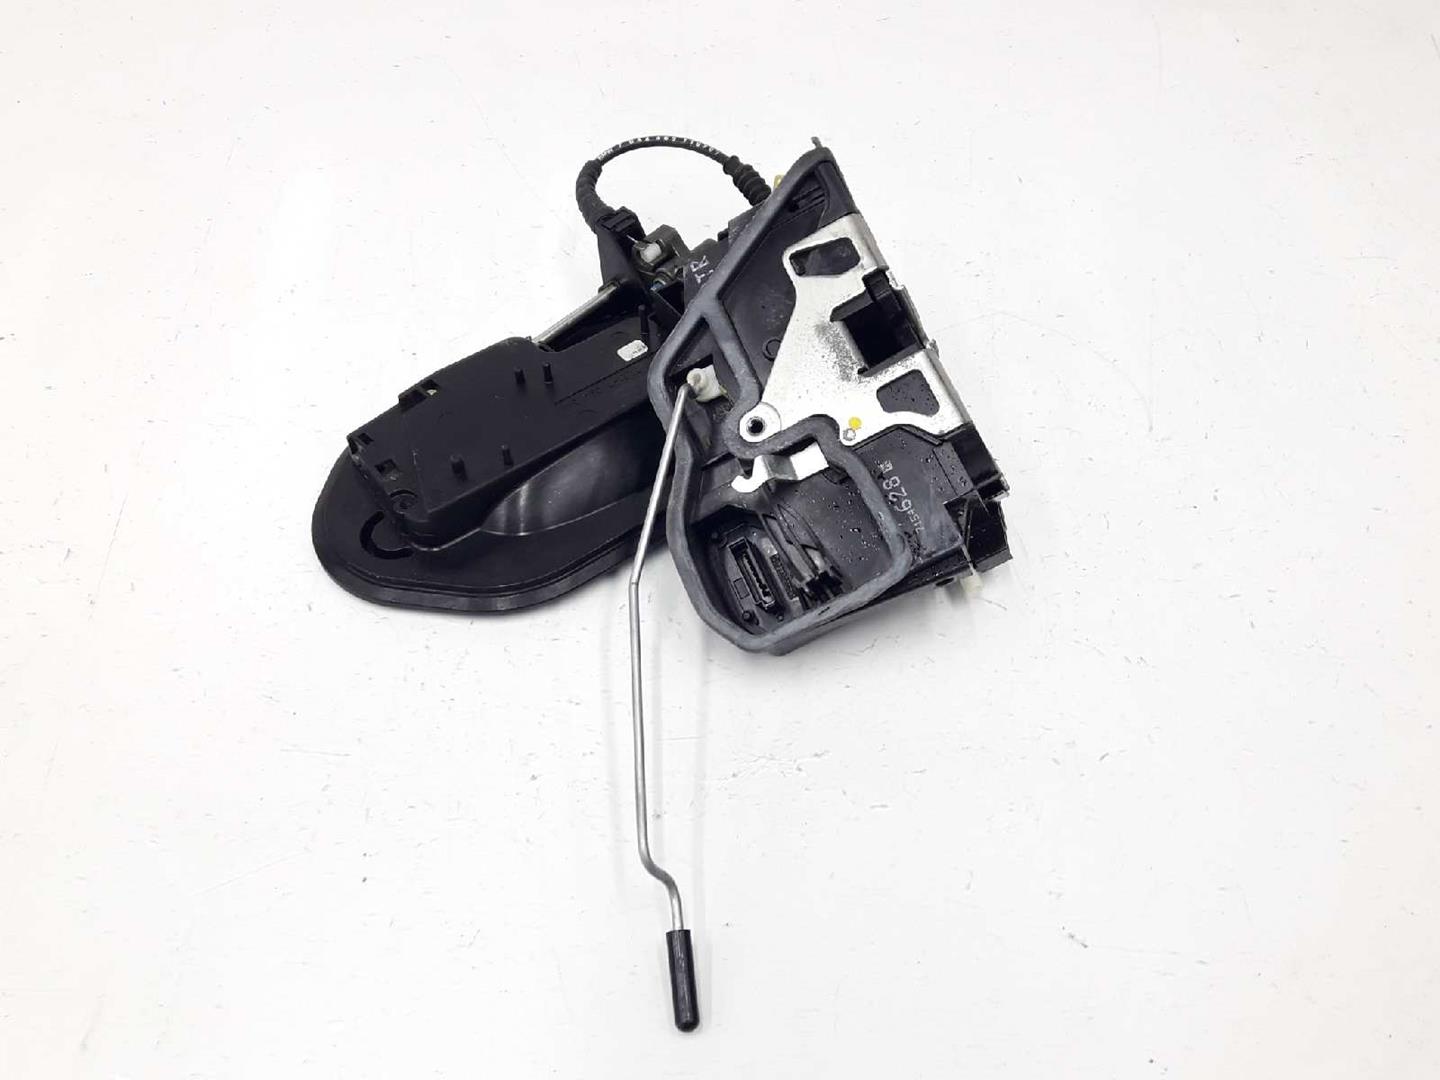 BMW 5 Series E60/E61 (2003-2010) Front Right Door Lock 7154628, 7PINES, 51217202146 19593316